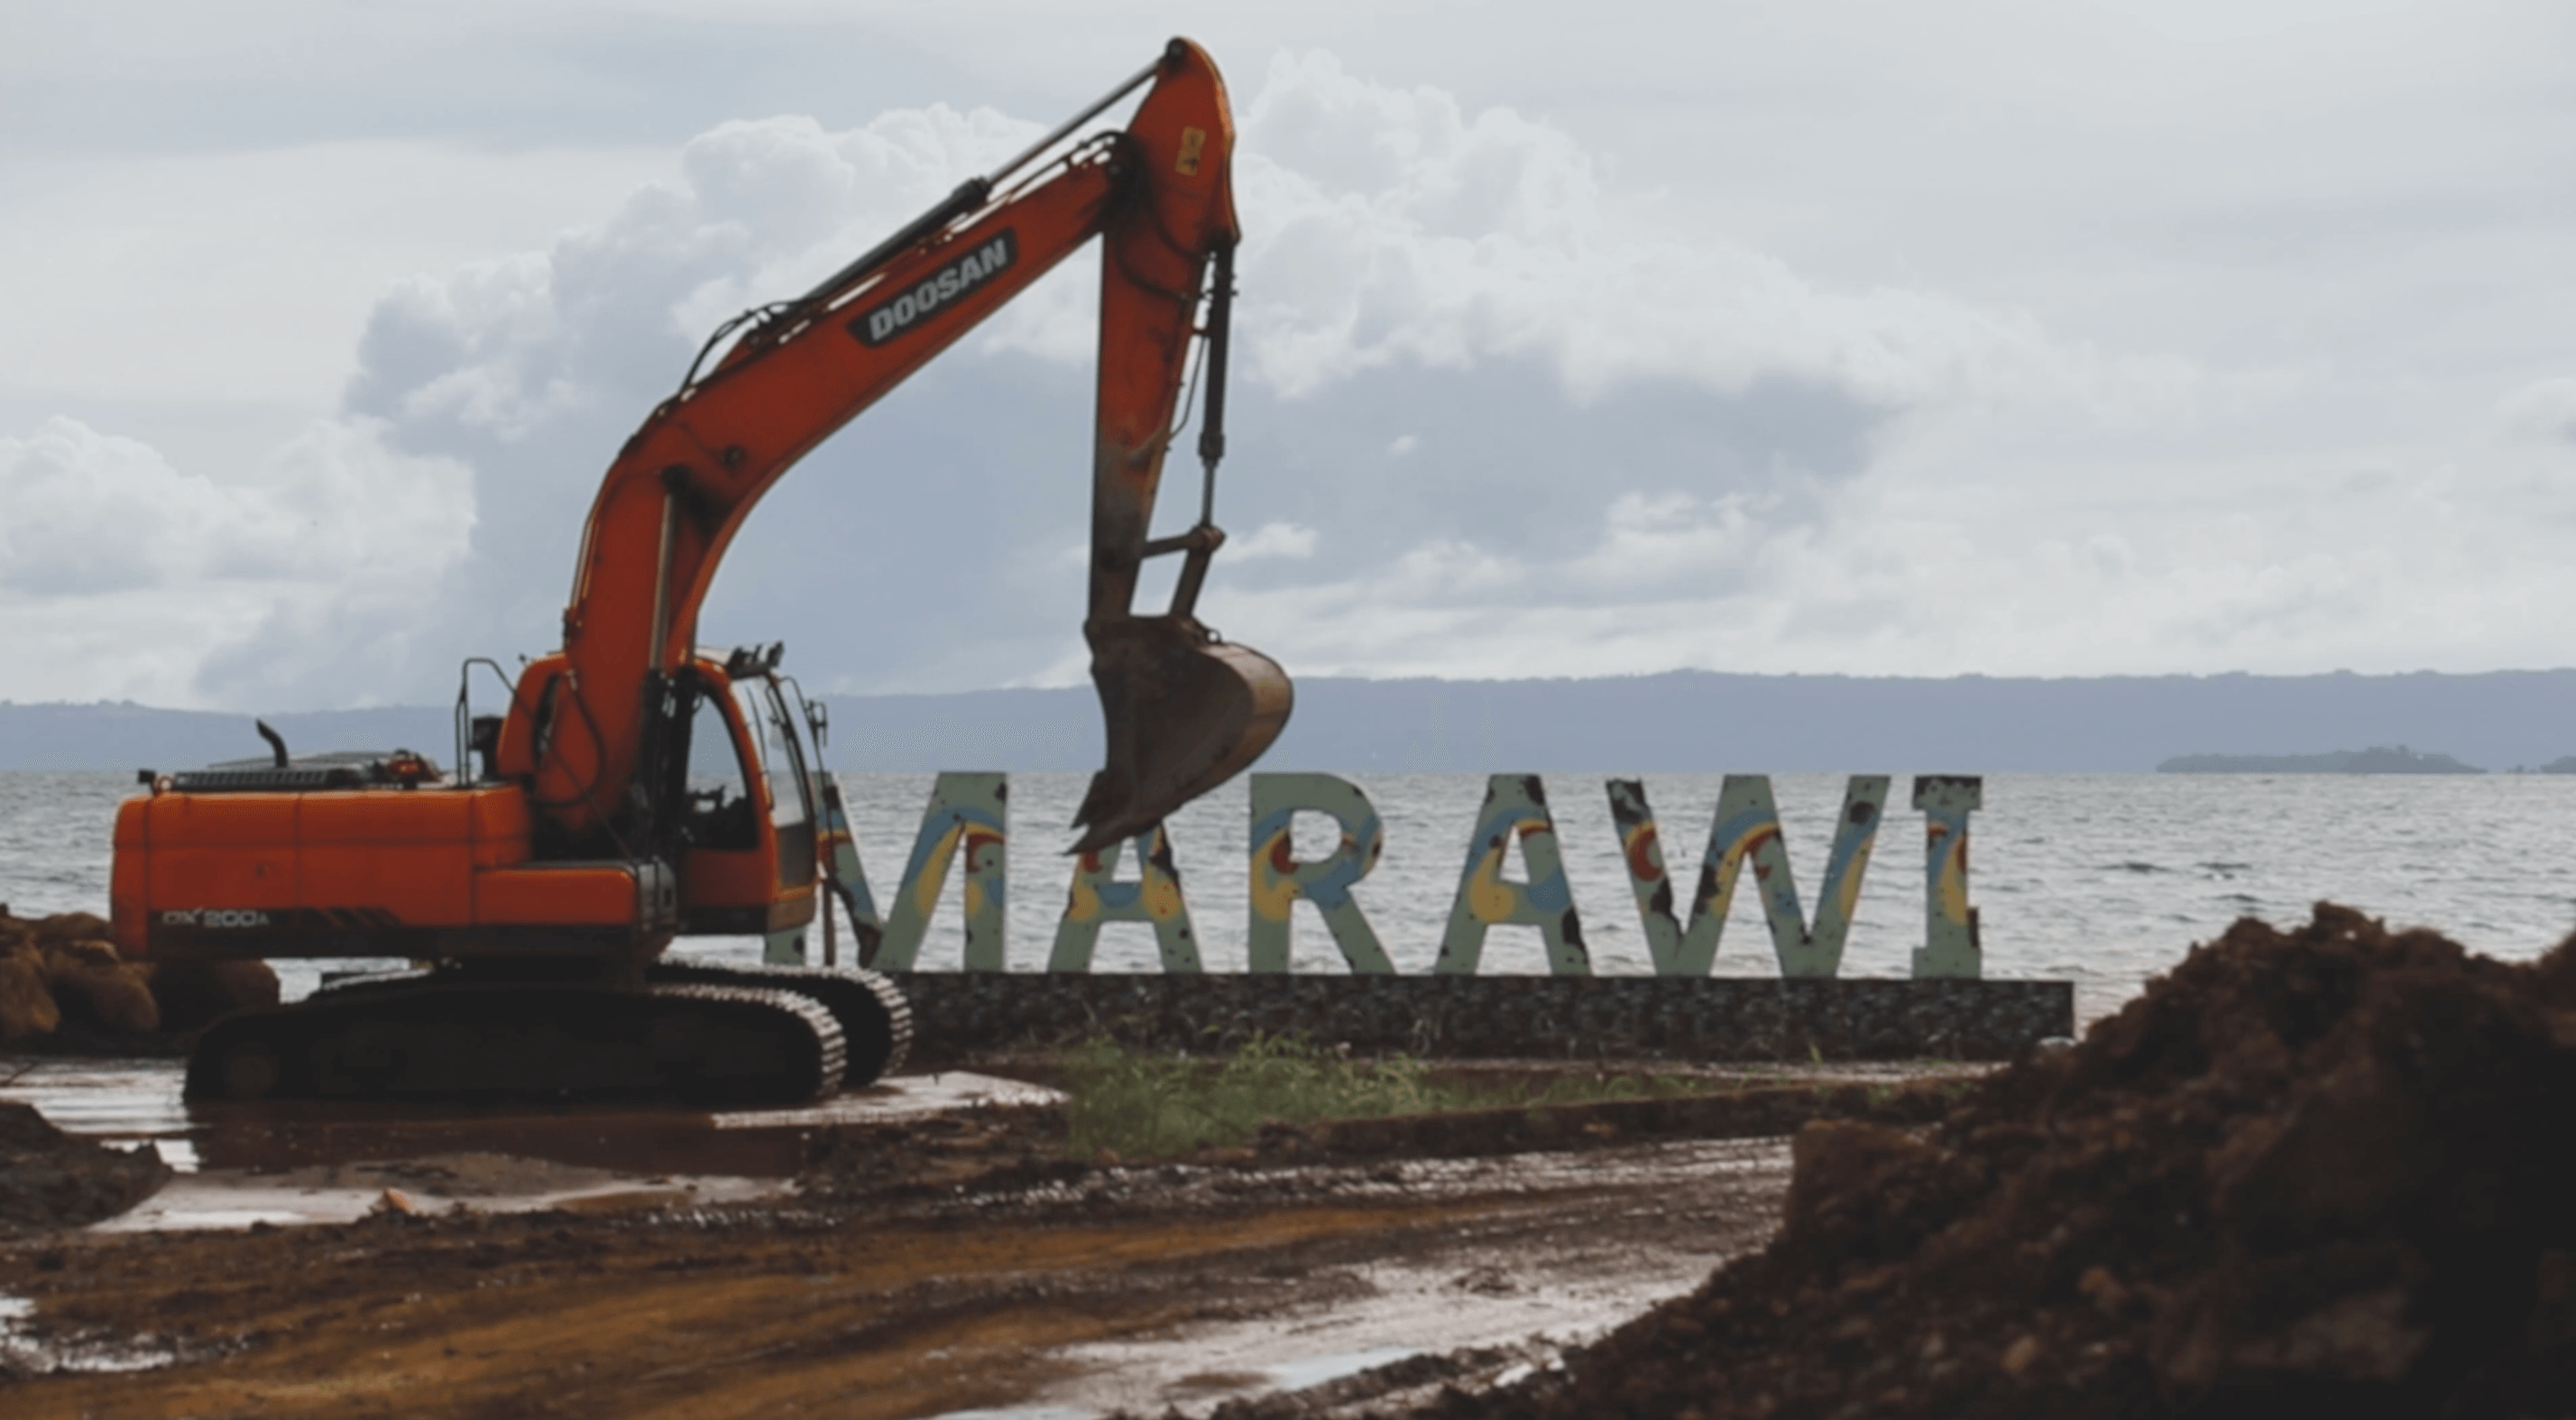 Rebuilding Marawi almost 4 years after the war